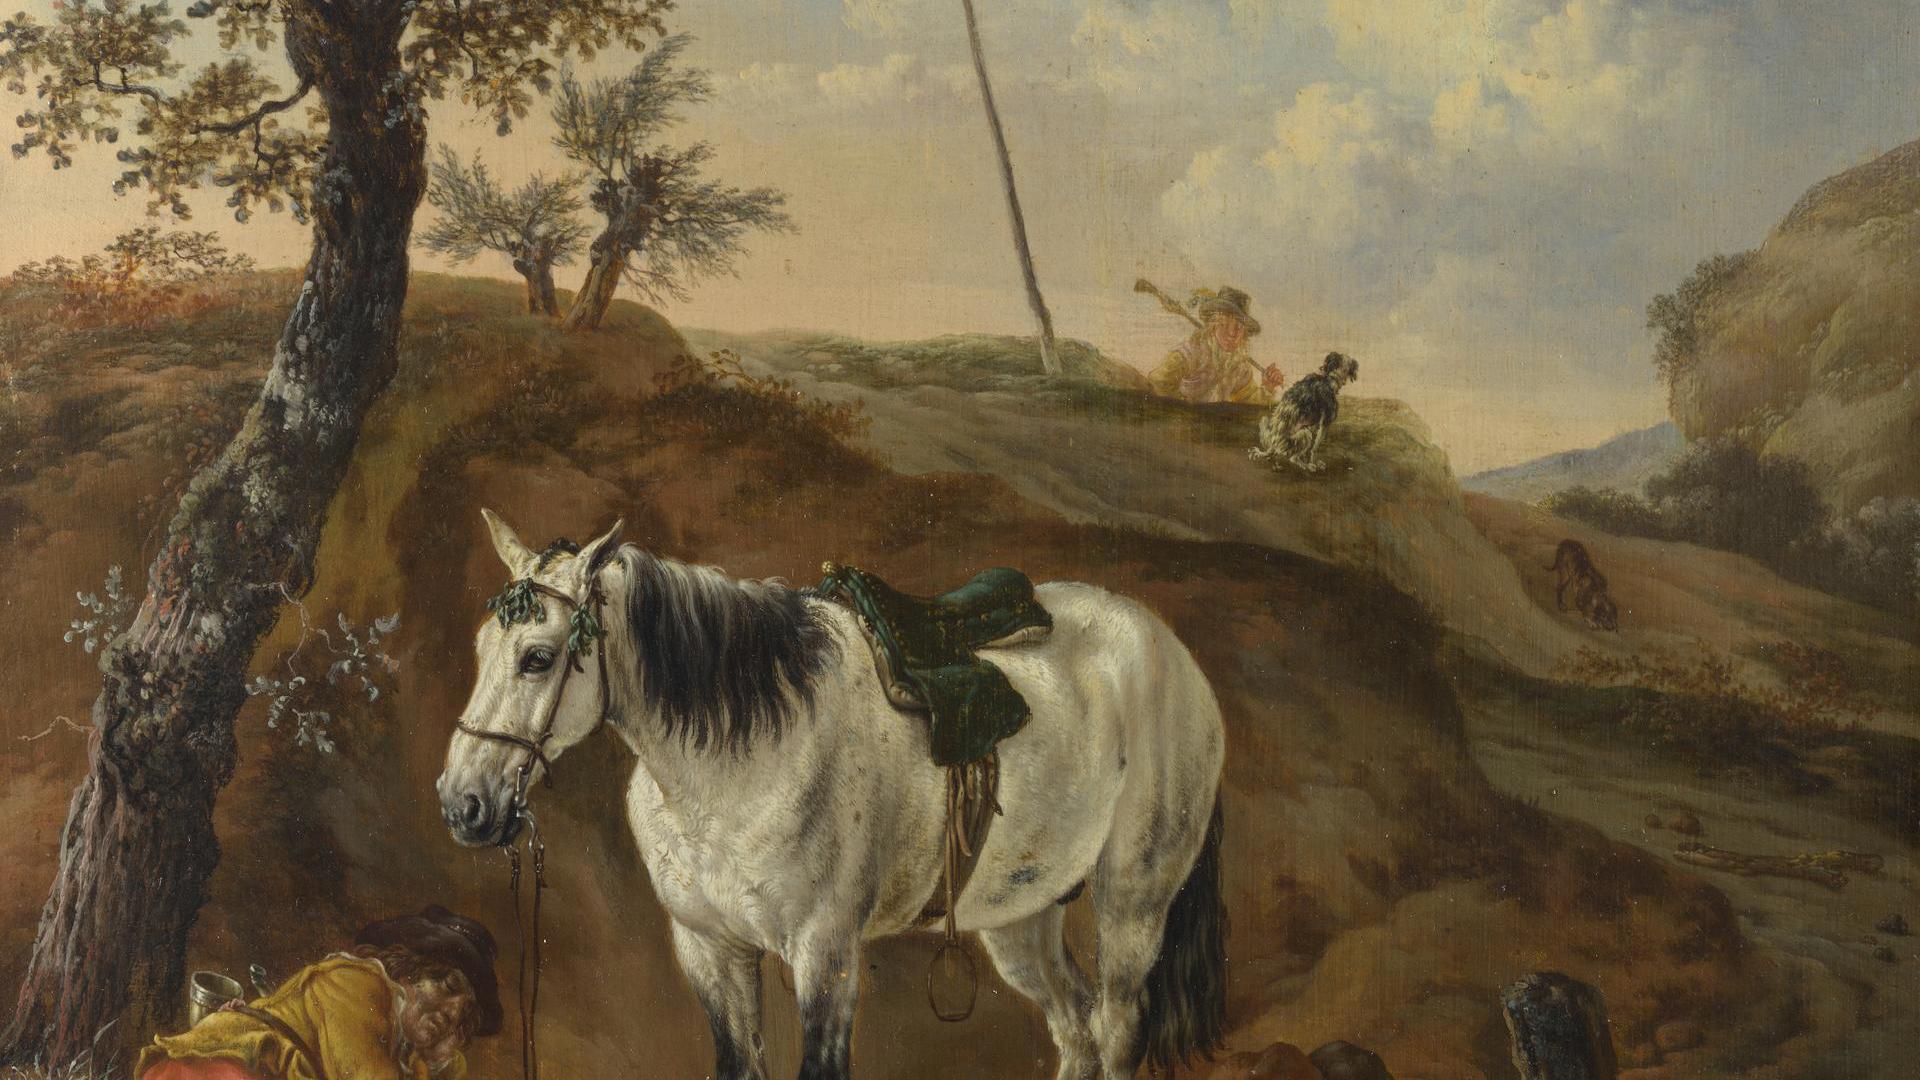 A White Horse standing by a Sleeping Man by Pieter Verbeeck